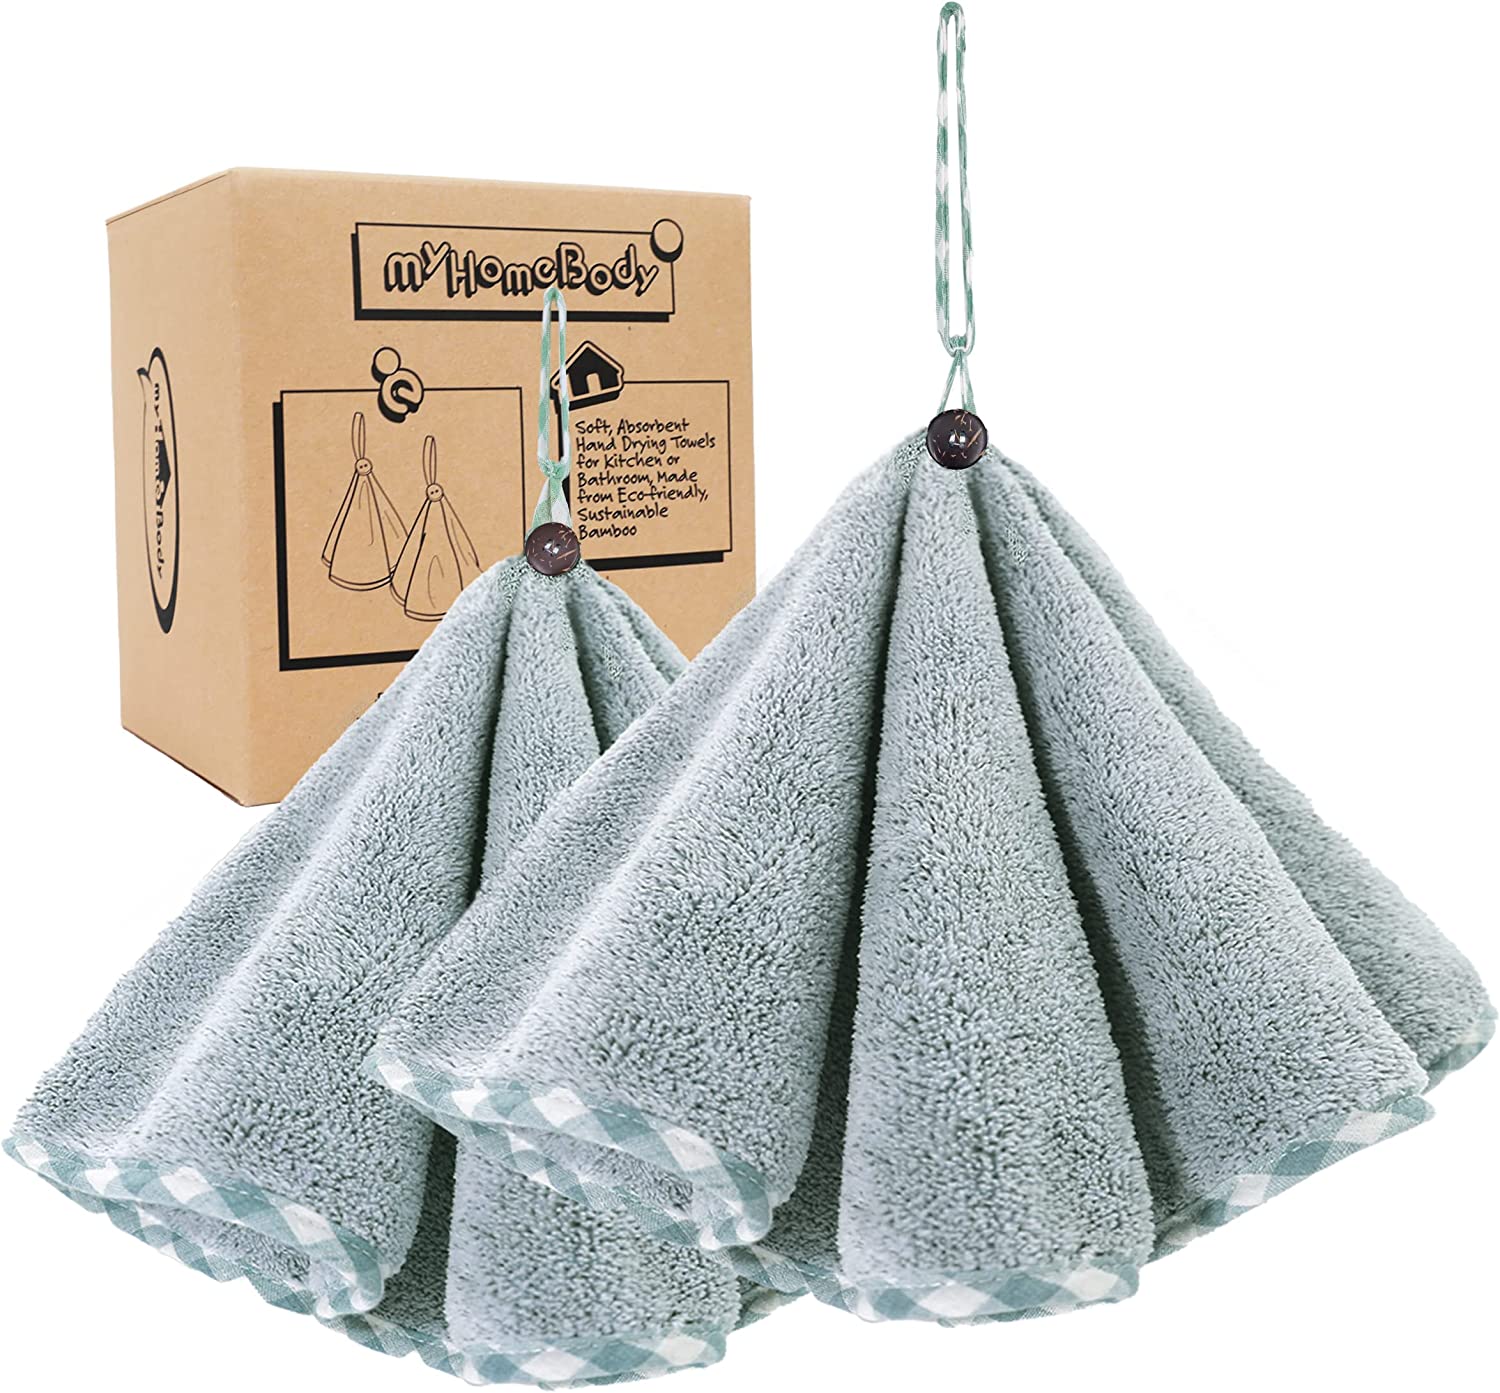 UMANI Towels Kitchen Cloths, Fine Fiber Fleece Super Soft and Absorbent  Dish Towels, Extra Thick Cleaning Towels and Hand Towels with Hanging Loop,  12